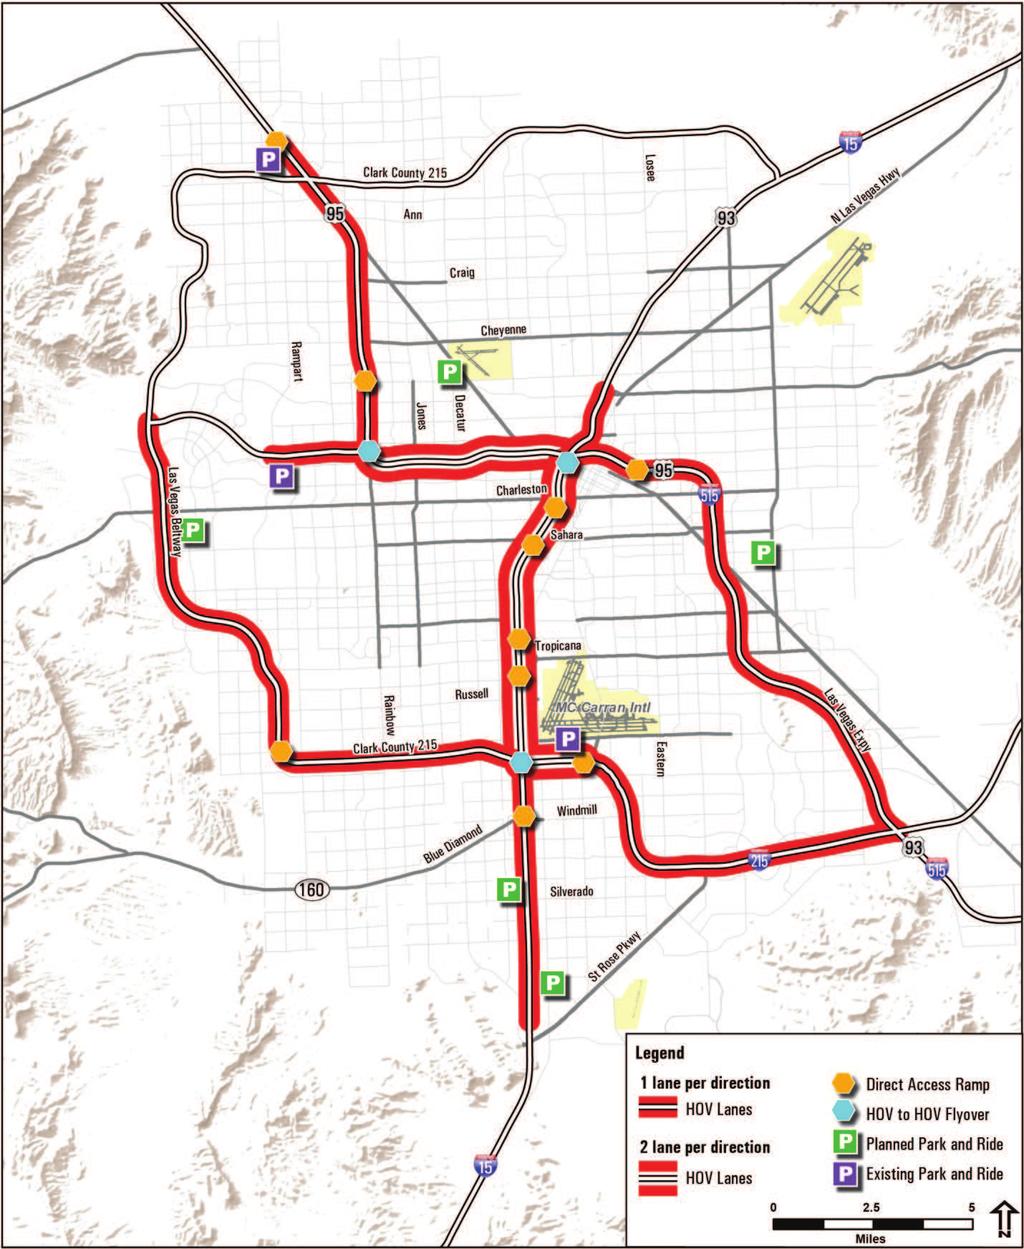 The proposed Long-Term System is not the ultimate HOV system for the Las Vegas Valley.